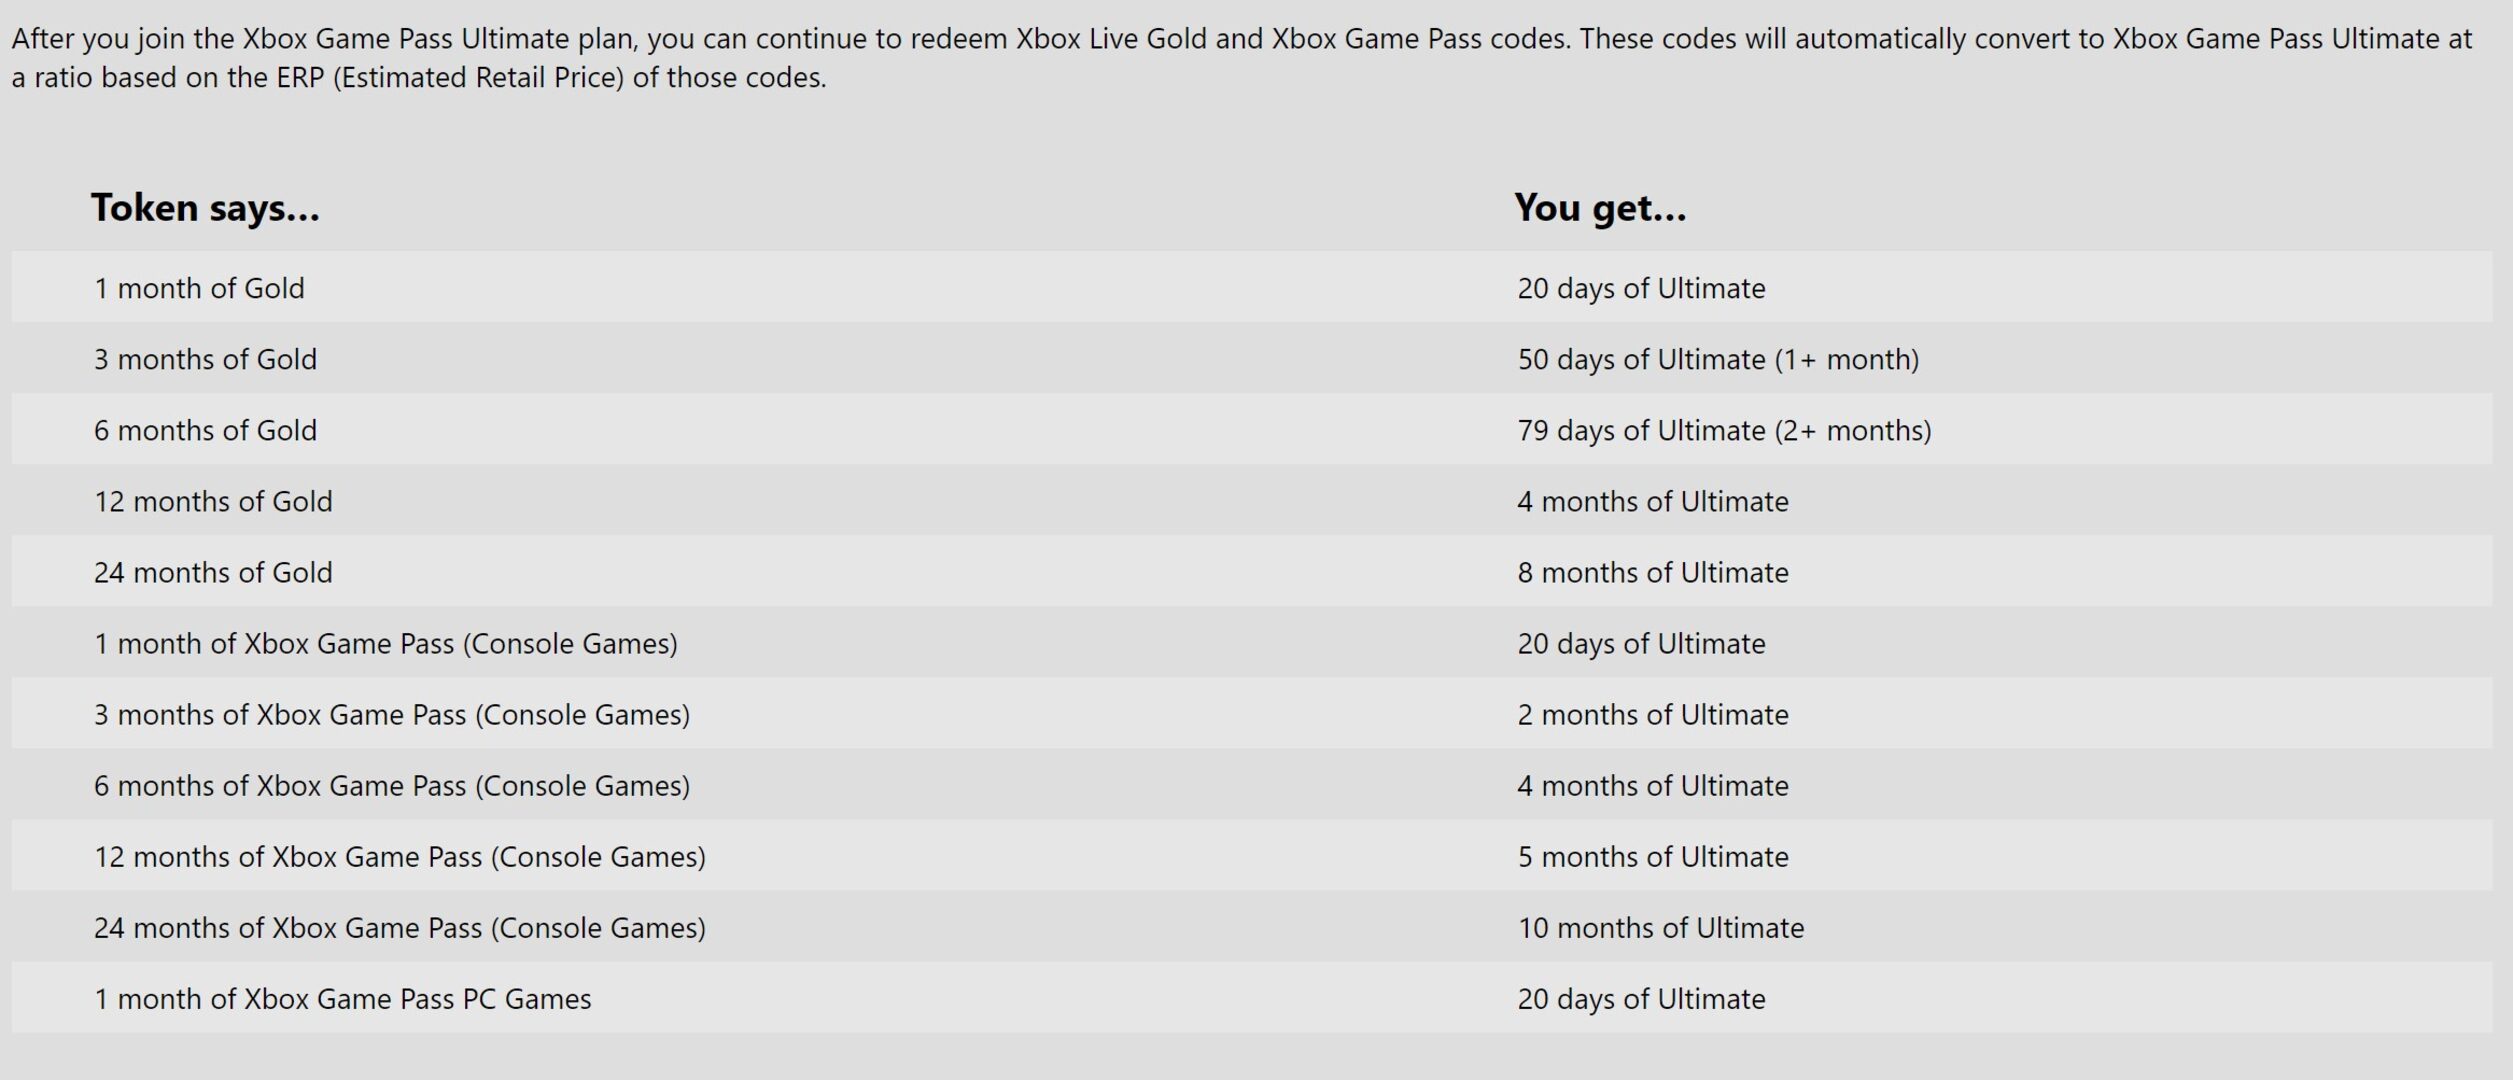 xbox live gold code 12 month membership